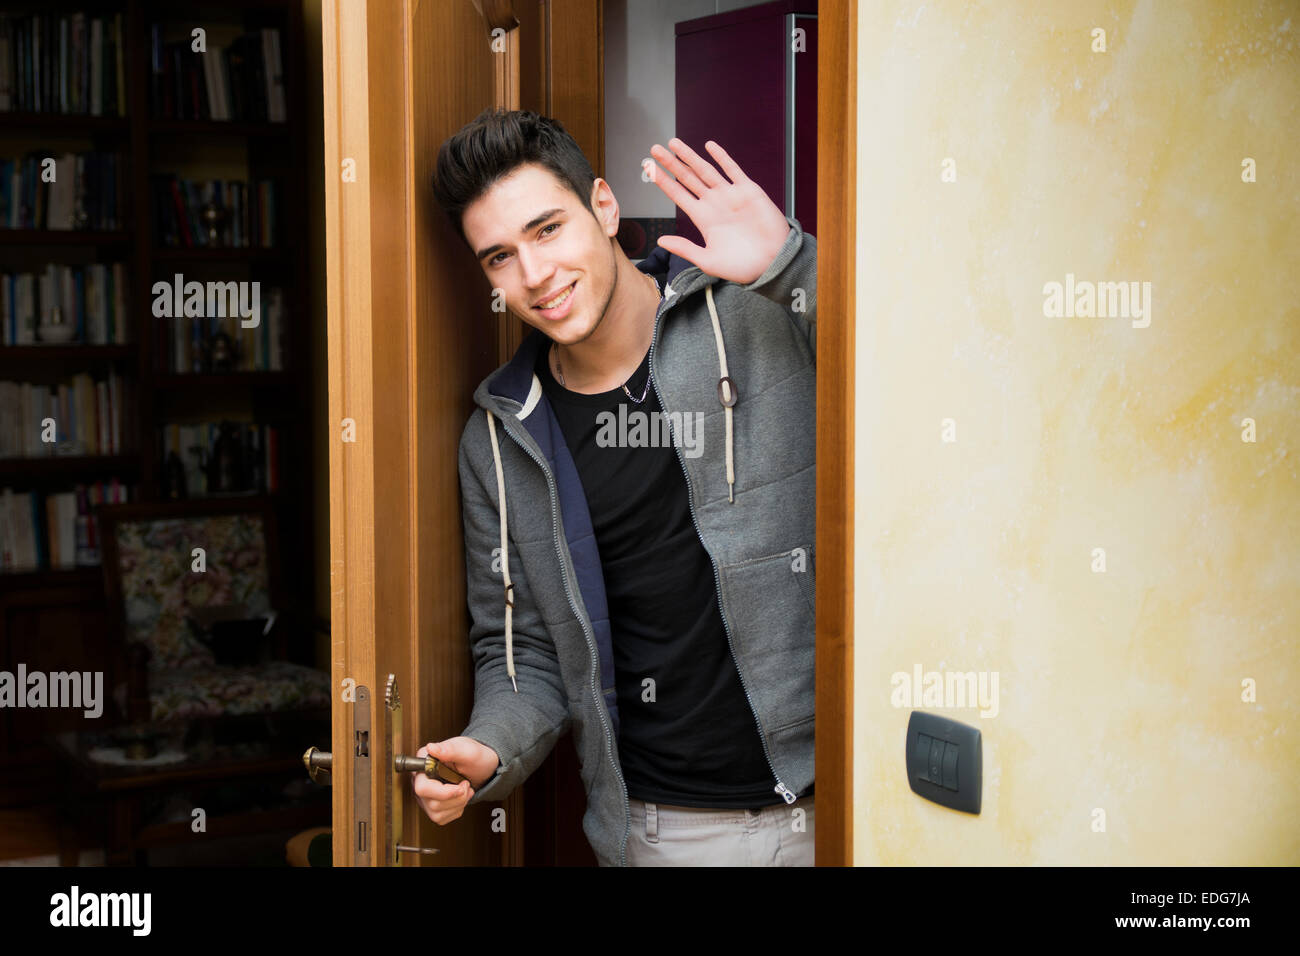 Smiling young man getting out of door waving at the camera with a friendly cheerful smile as he peers around the edge of a woode Stock Photo